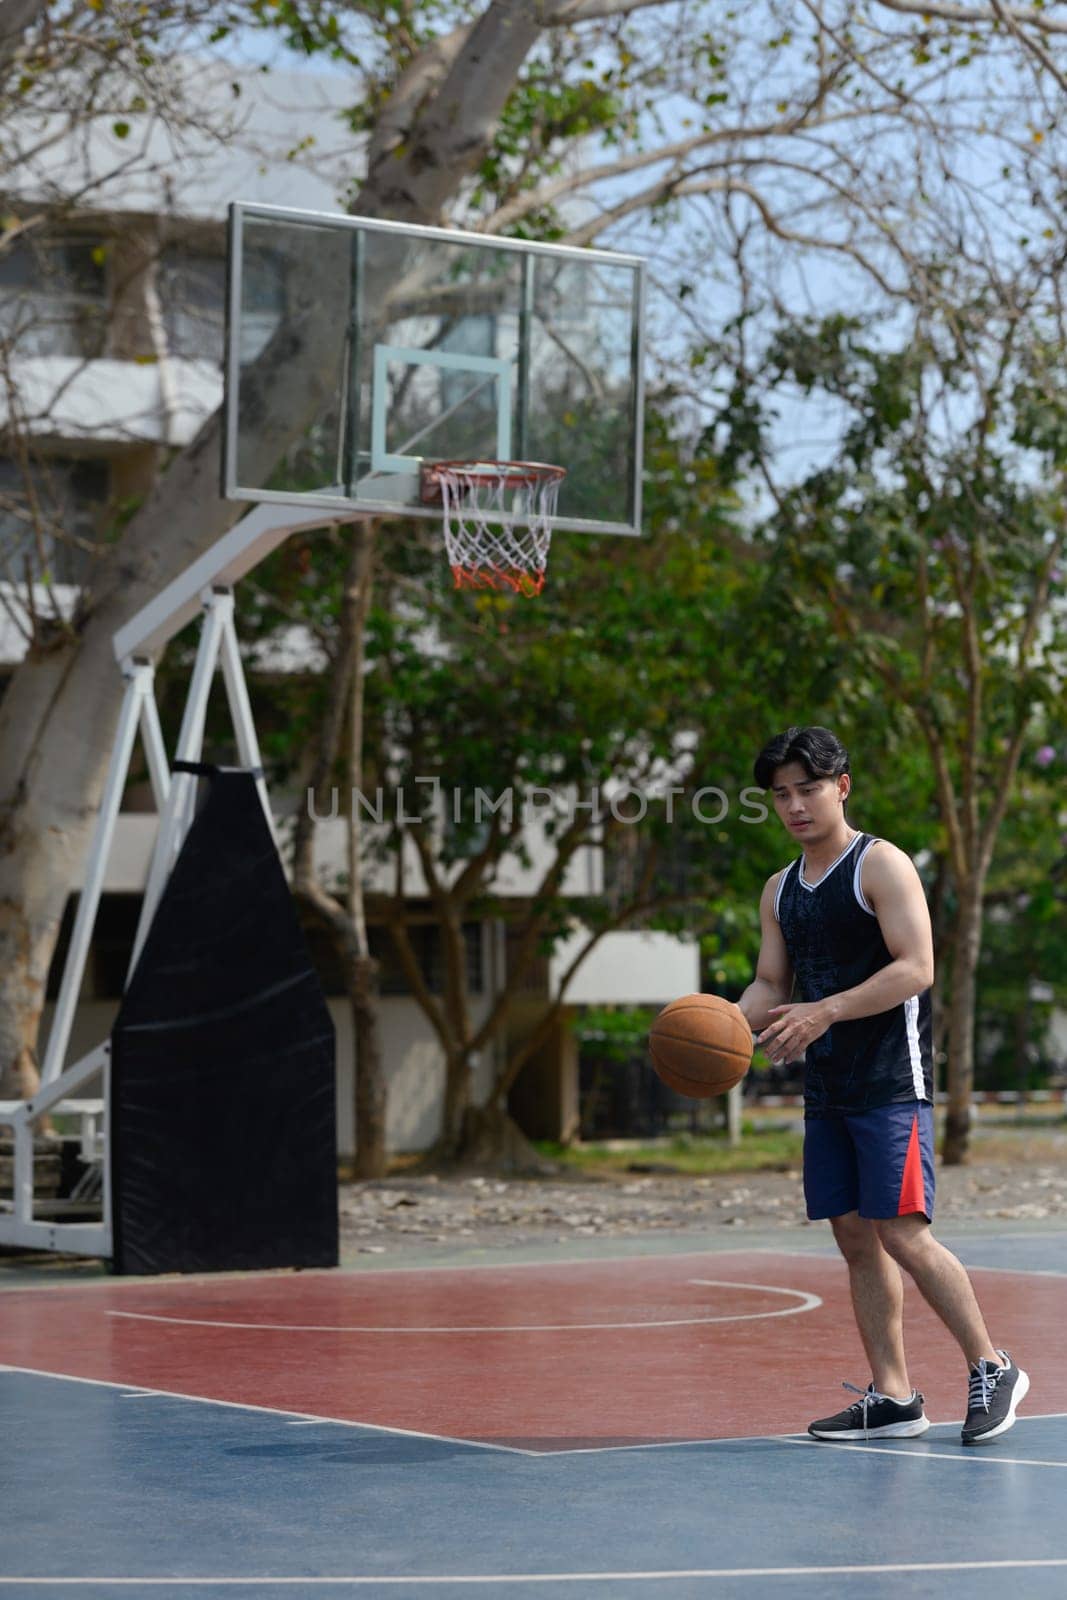 Young male athlete playing basketball on a public court. Sport, energy and healthy lifestyle concept.